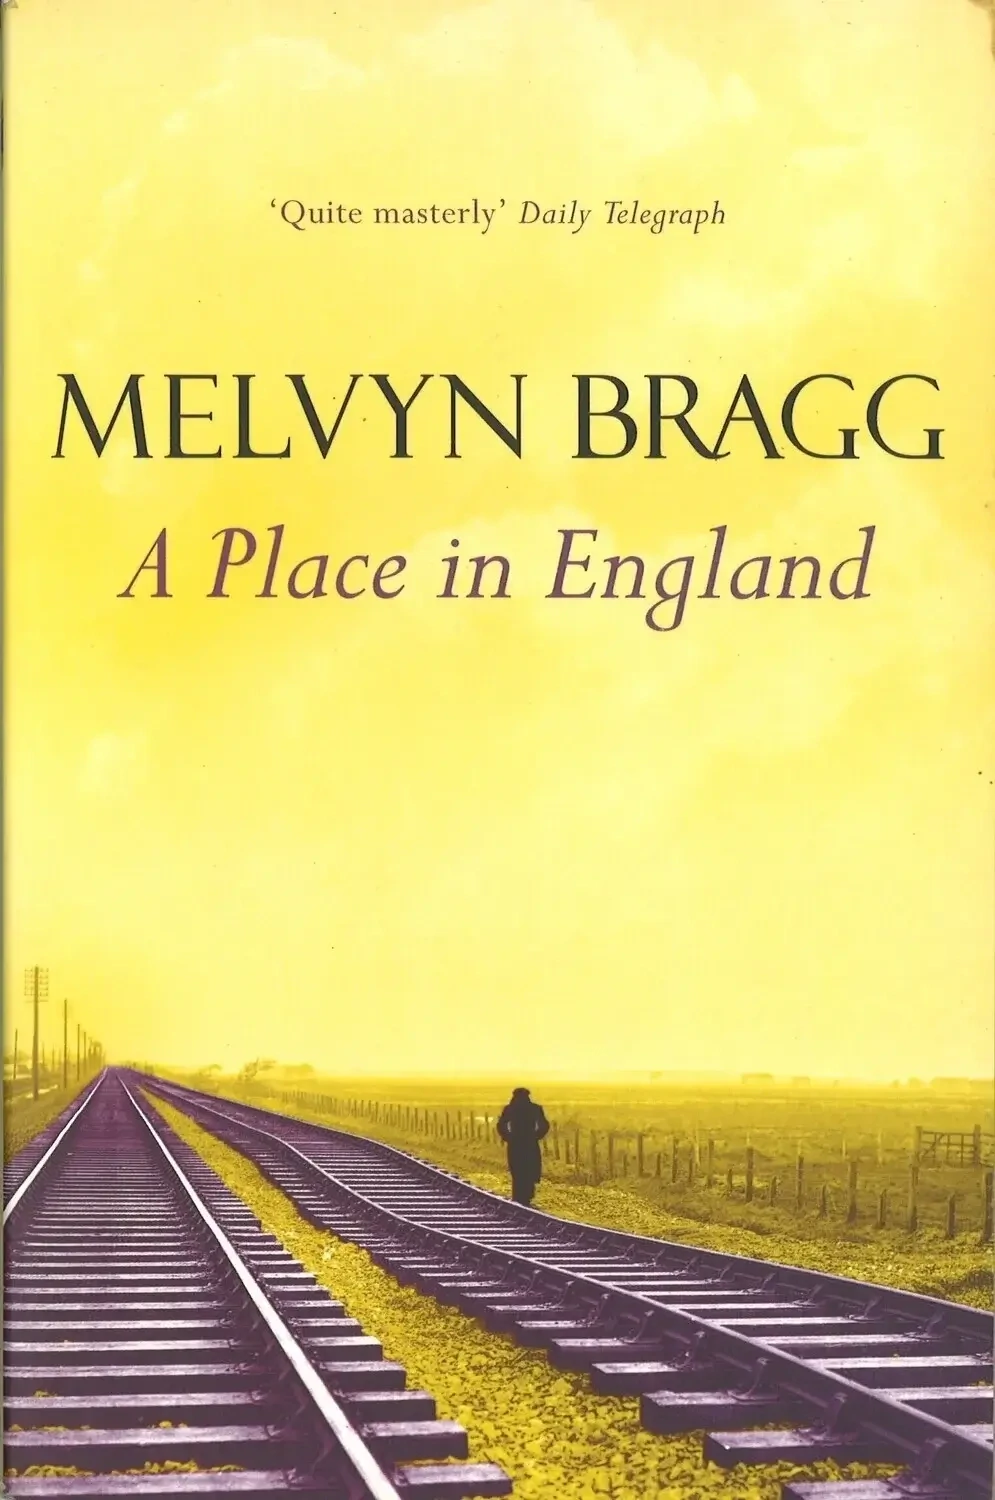 A Place in England by Melvyn Bragg